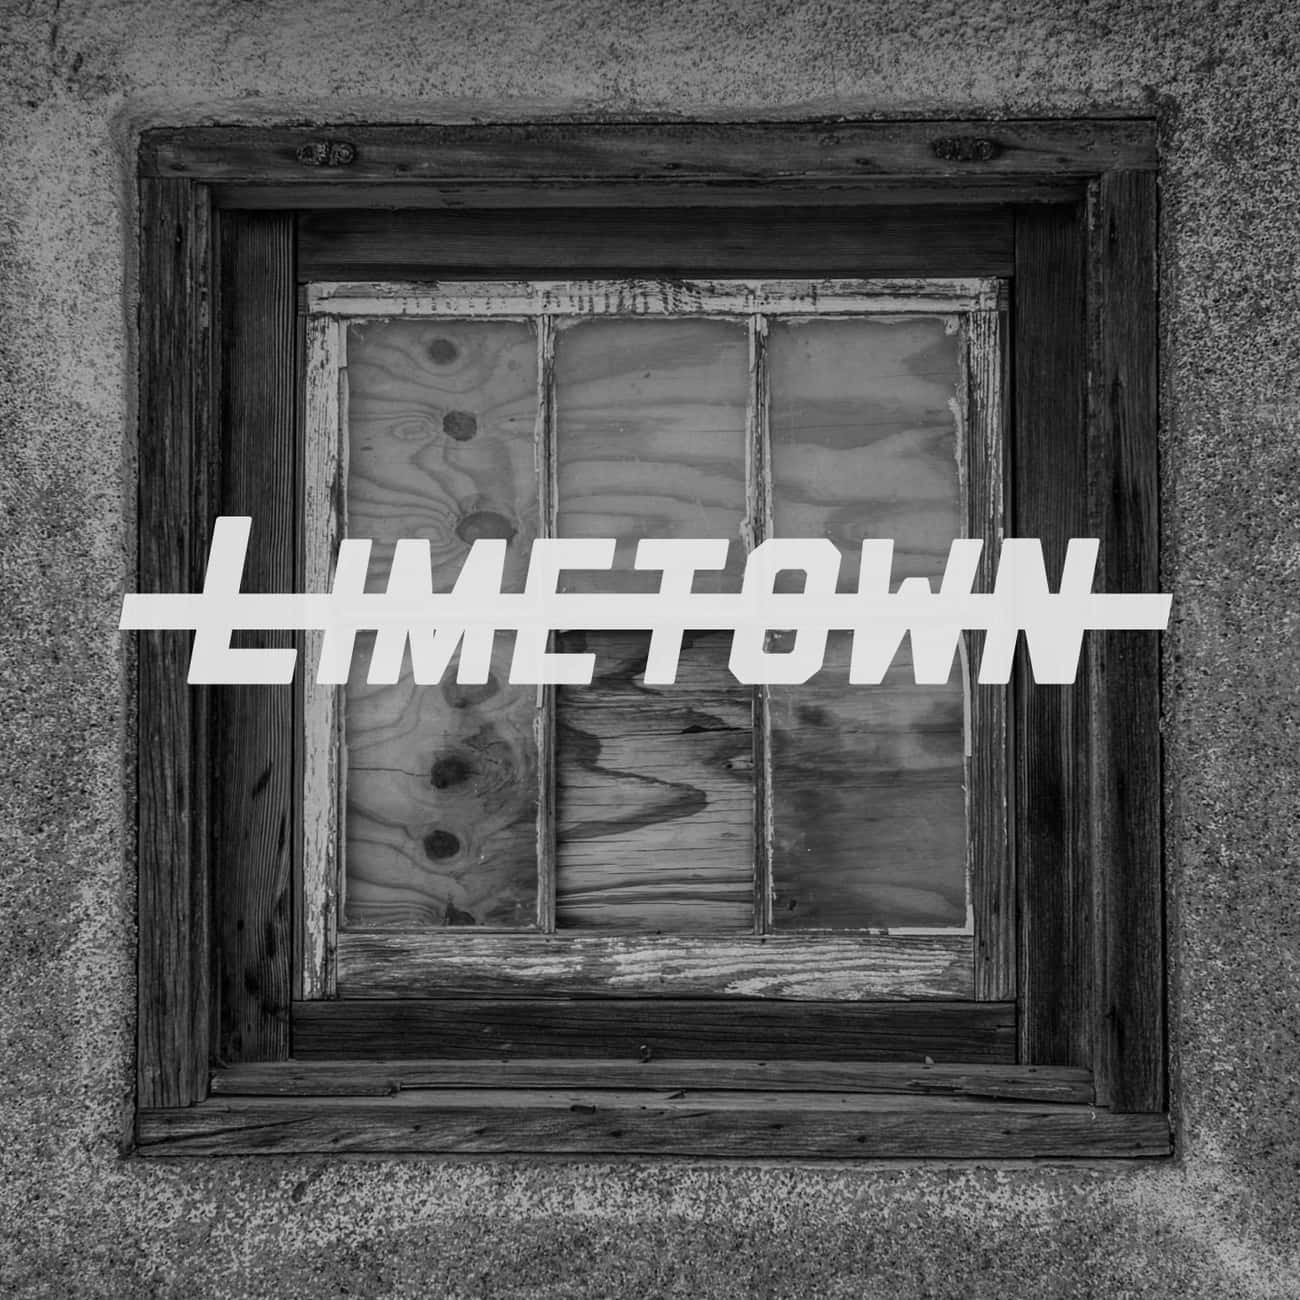 Limetown Blends Investigative Reporting With Rampant Conspiracy